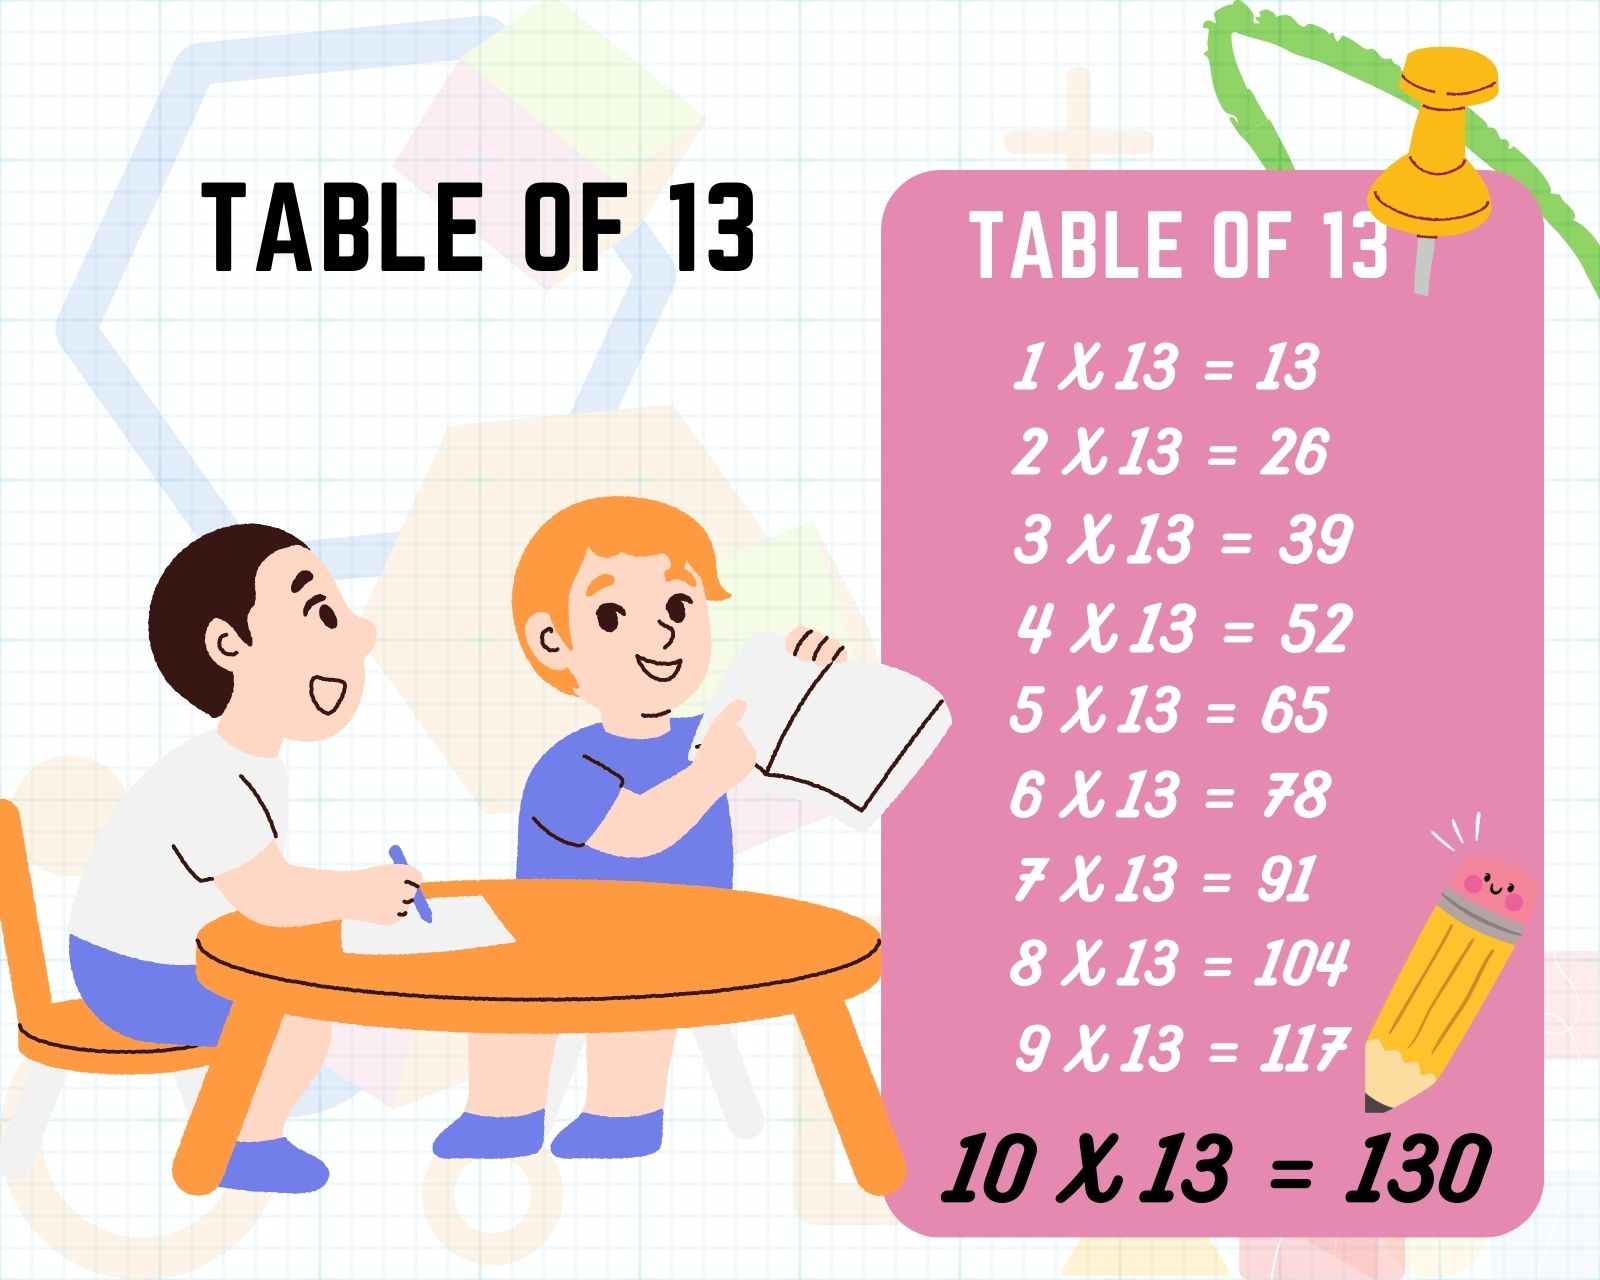 Table of 13 | 13 times table | tables 13 to 20, download the PDF of the 13 times table or 13 table pdf file